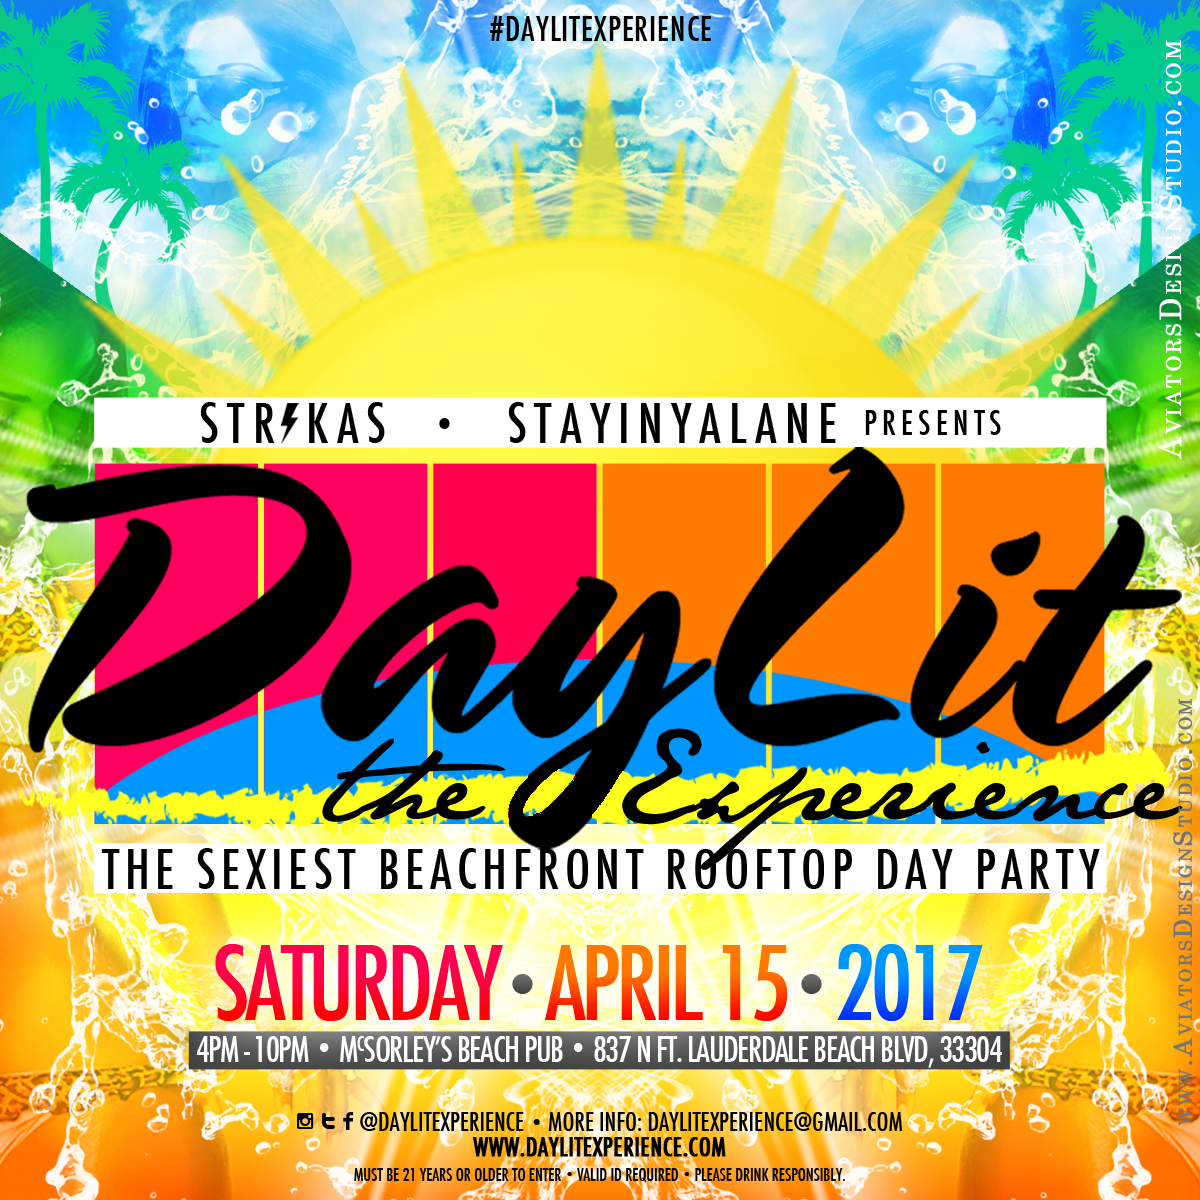 DayLit The Experience - The Ultimate Beachfront Rooftop Day Party featuring Your Favourite DJ, Mr. Magnum